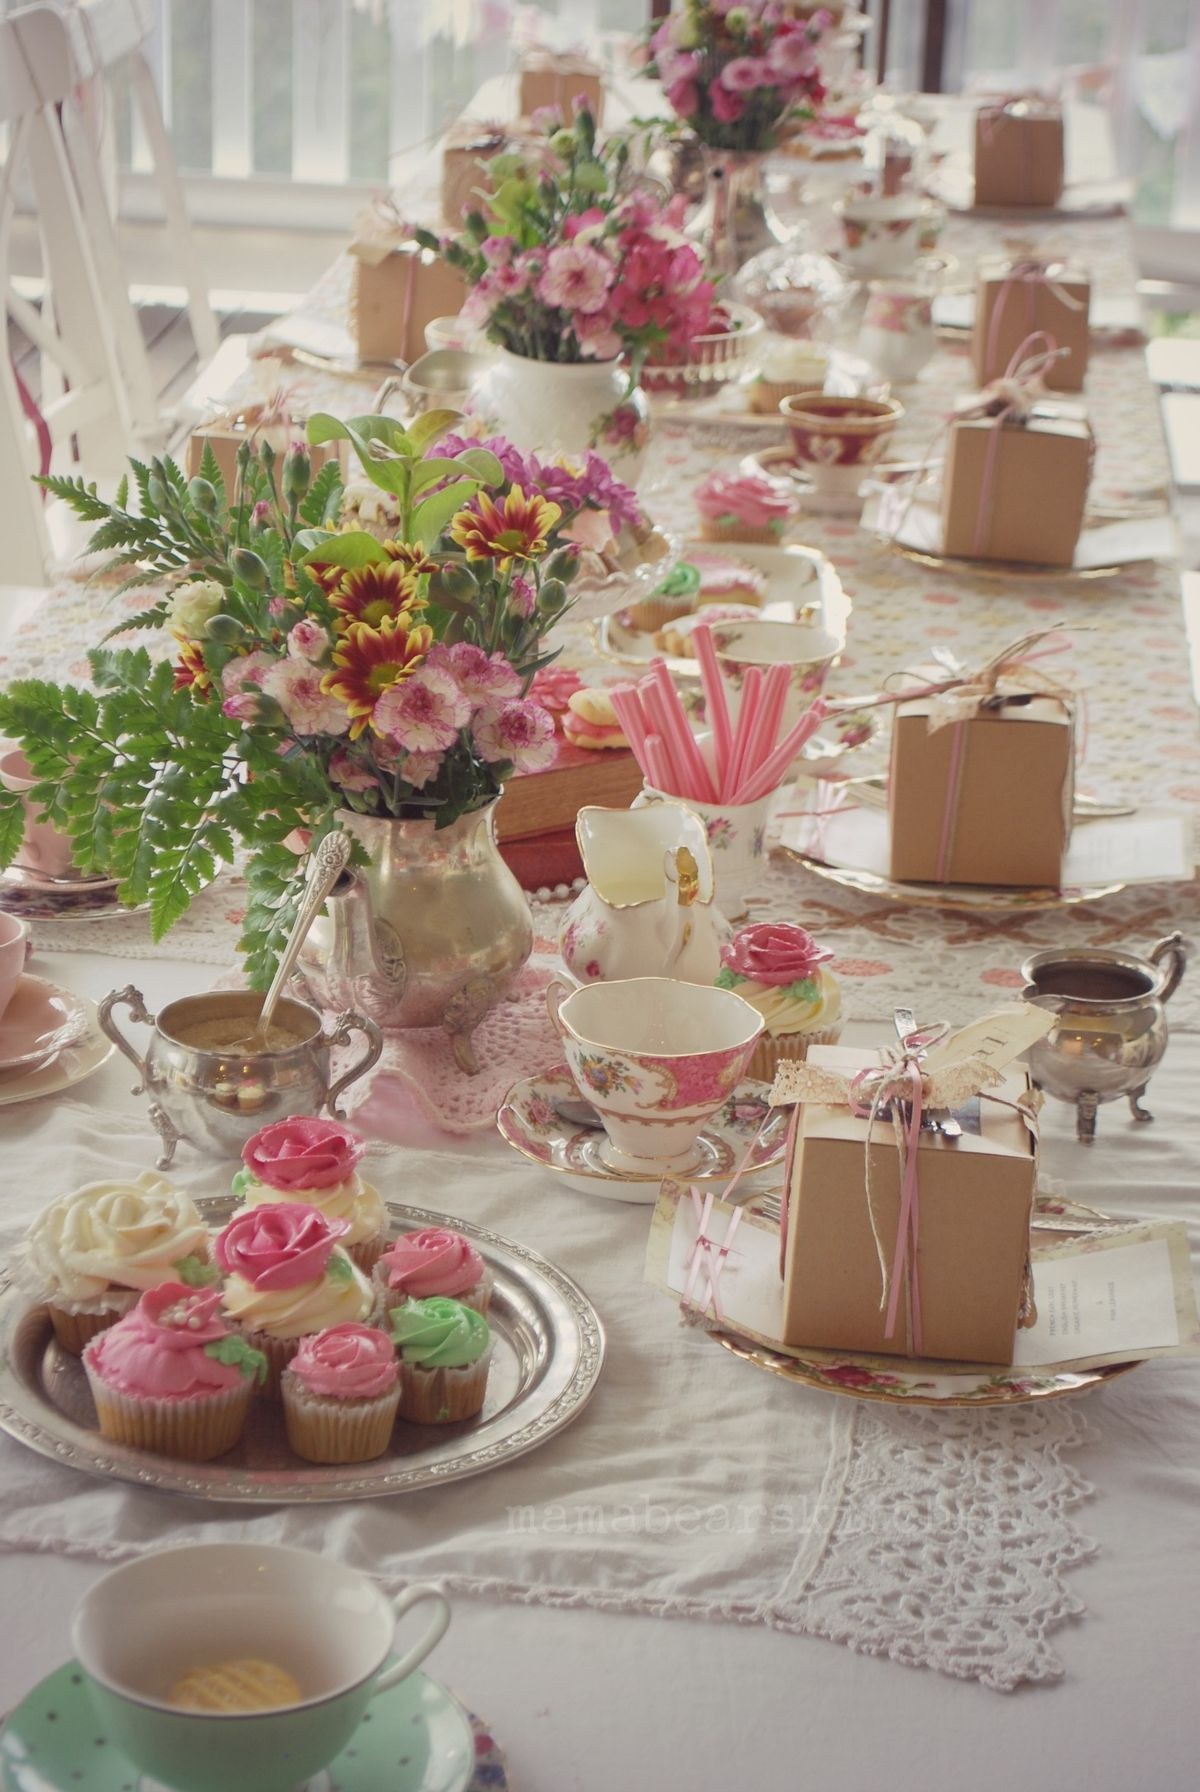 Tea Party Decorating Ideas
 Pin by Joy Ray on Tablescape in 2019